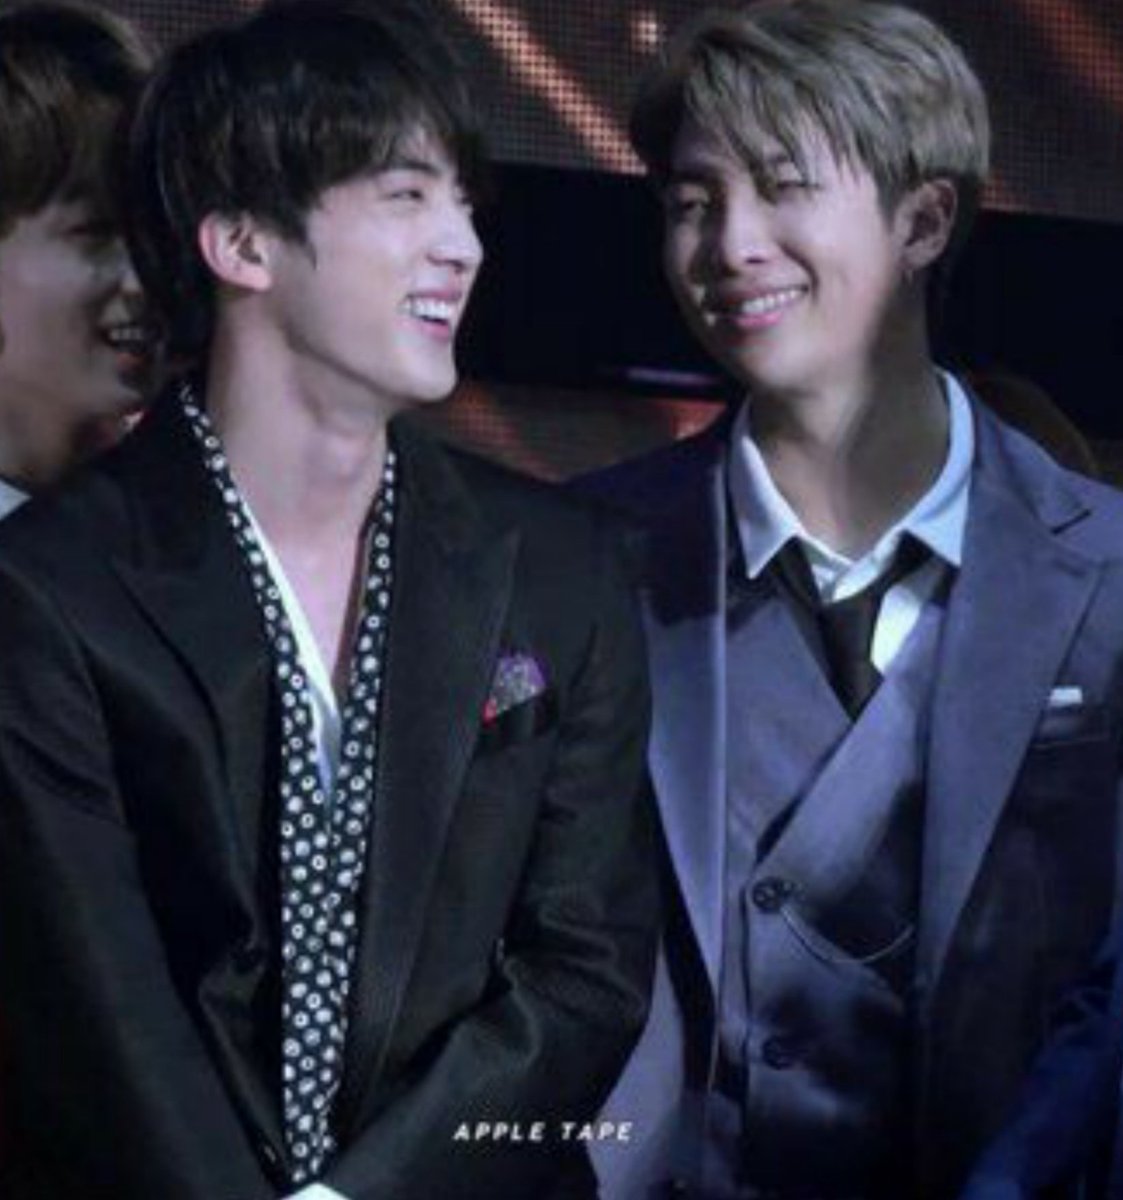 Always laugh with your seokjin